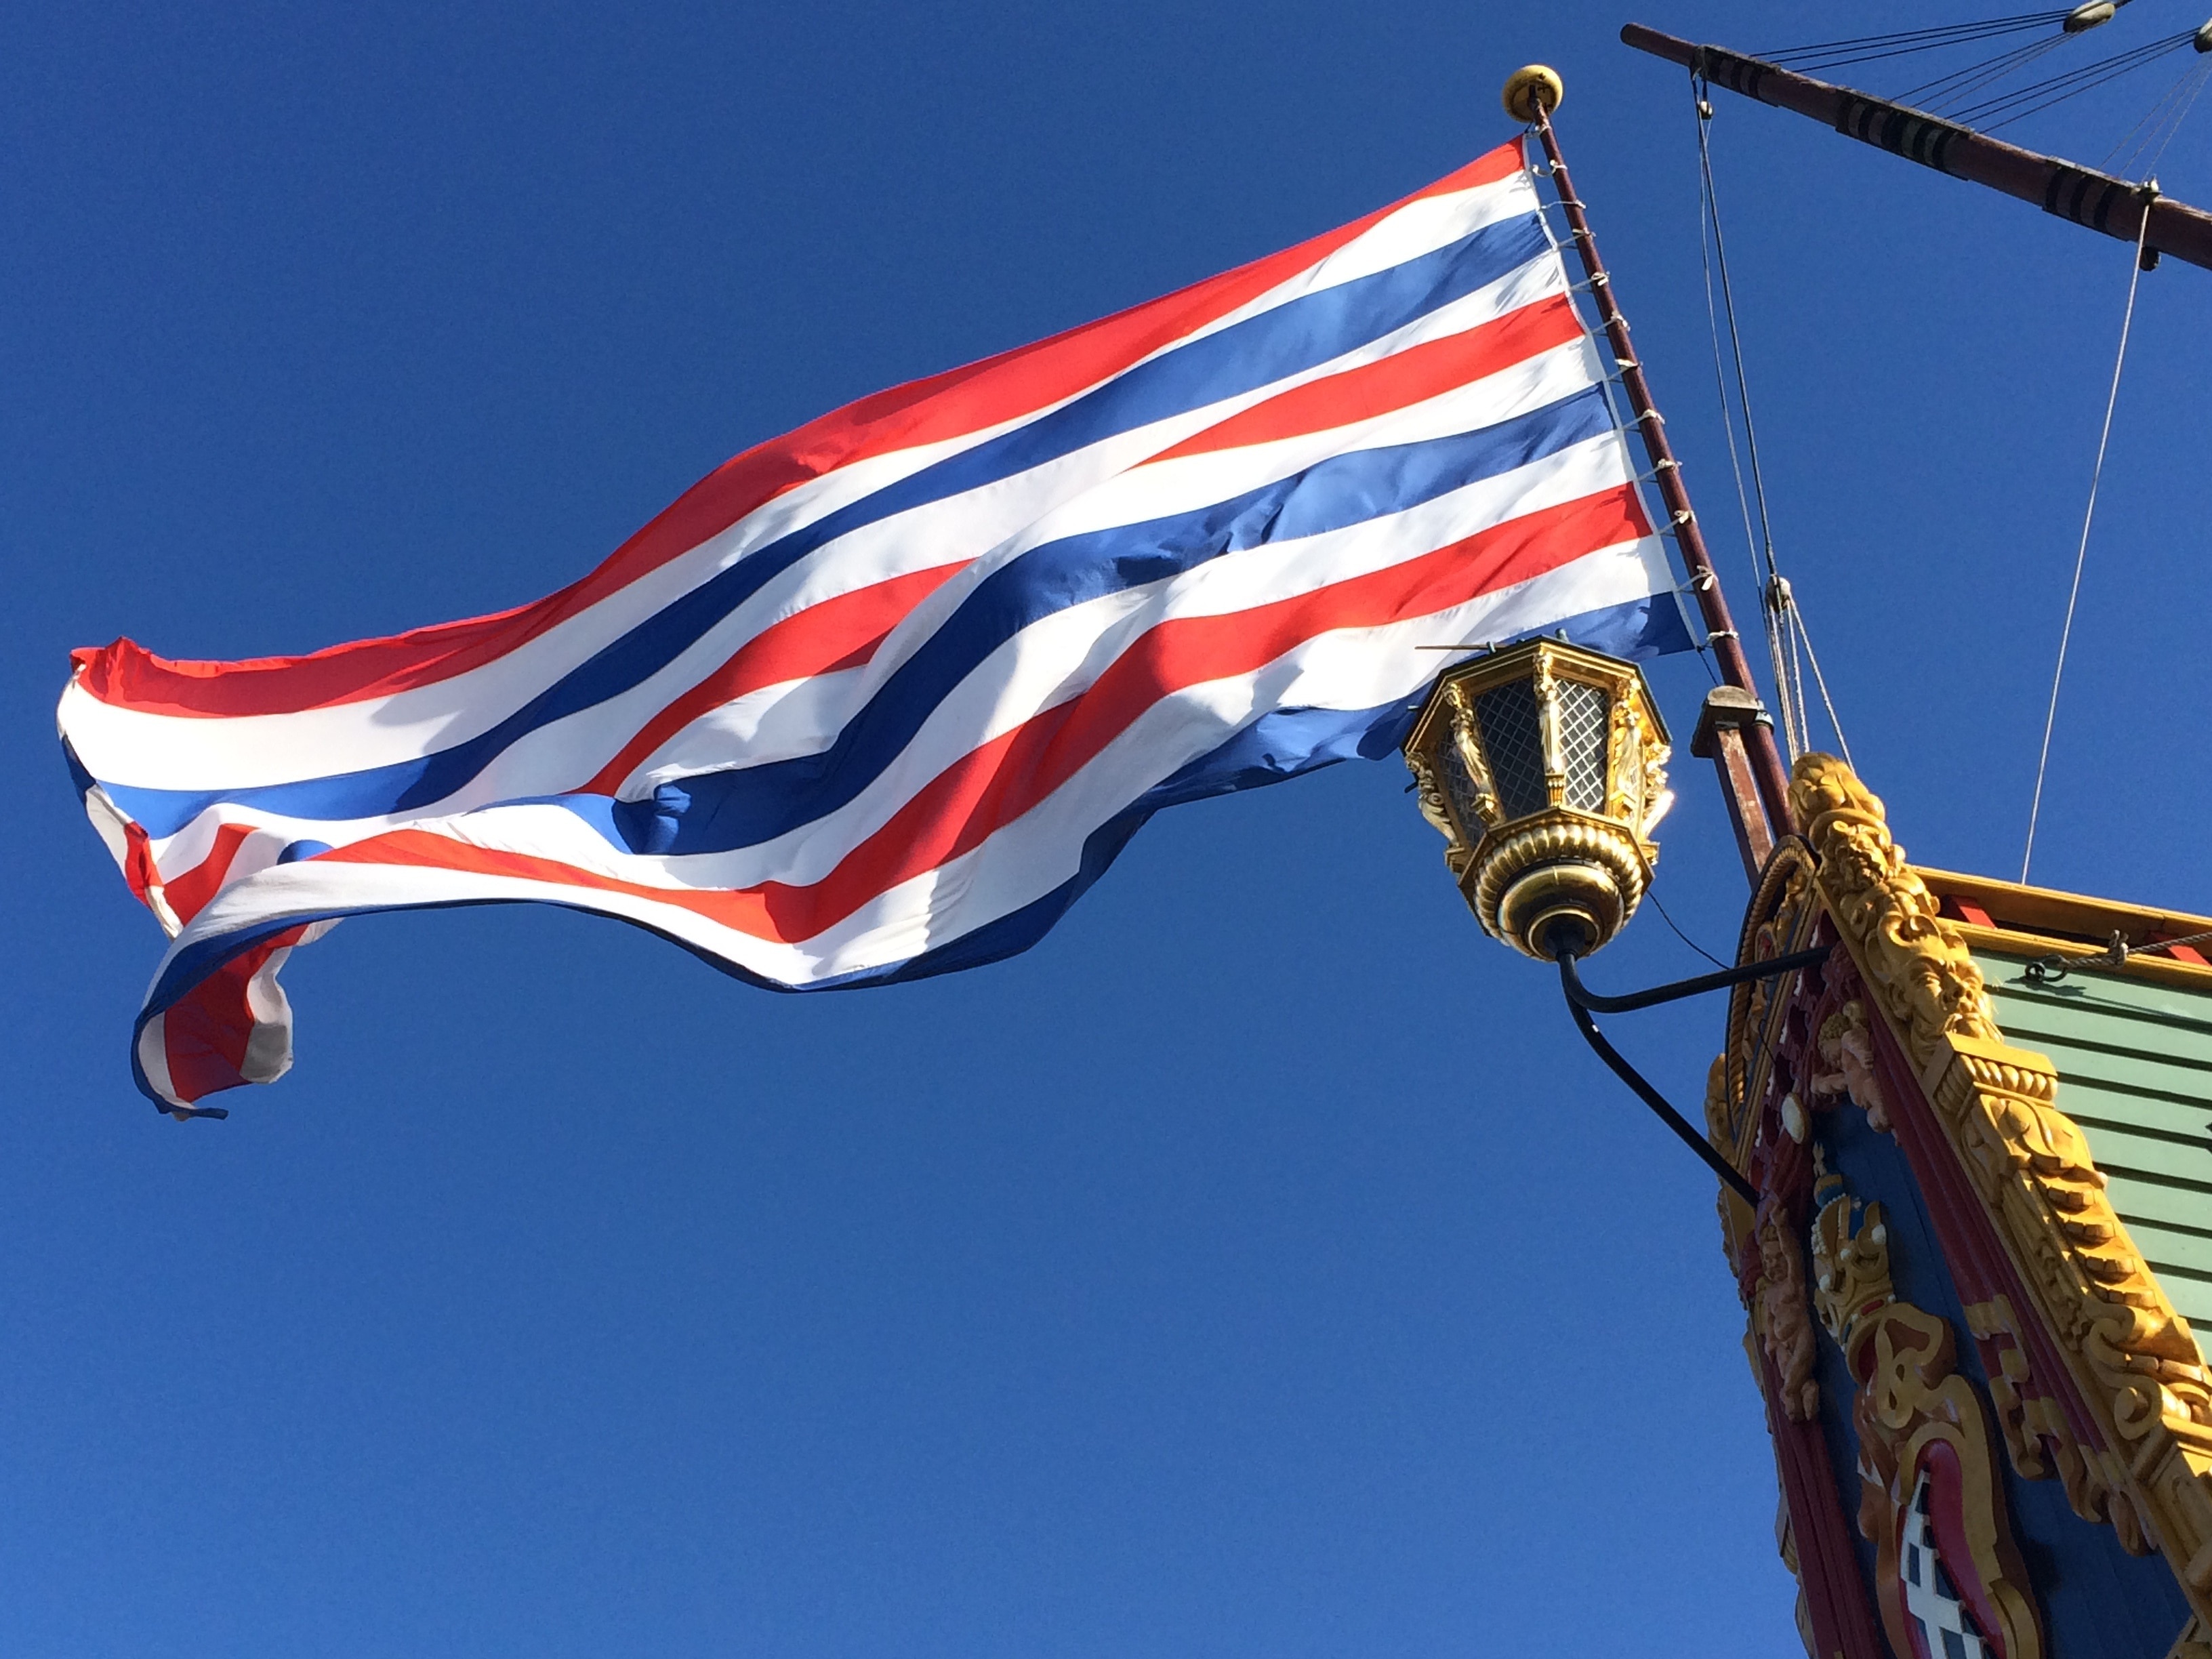 red, white, and blue flag in brown pole